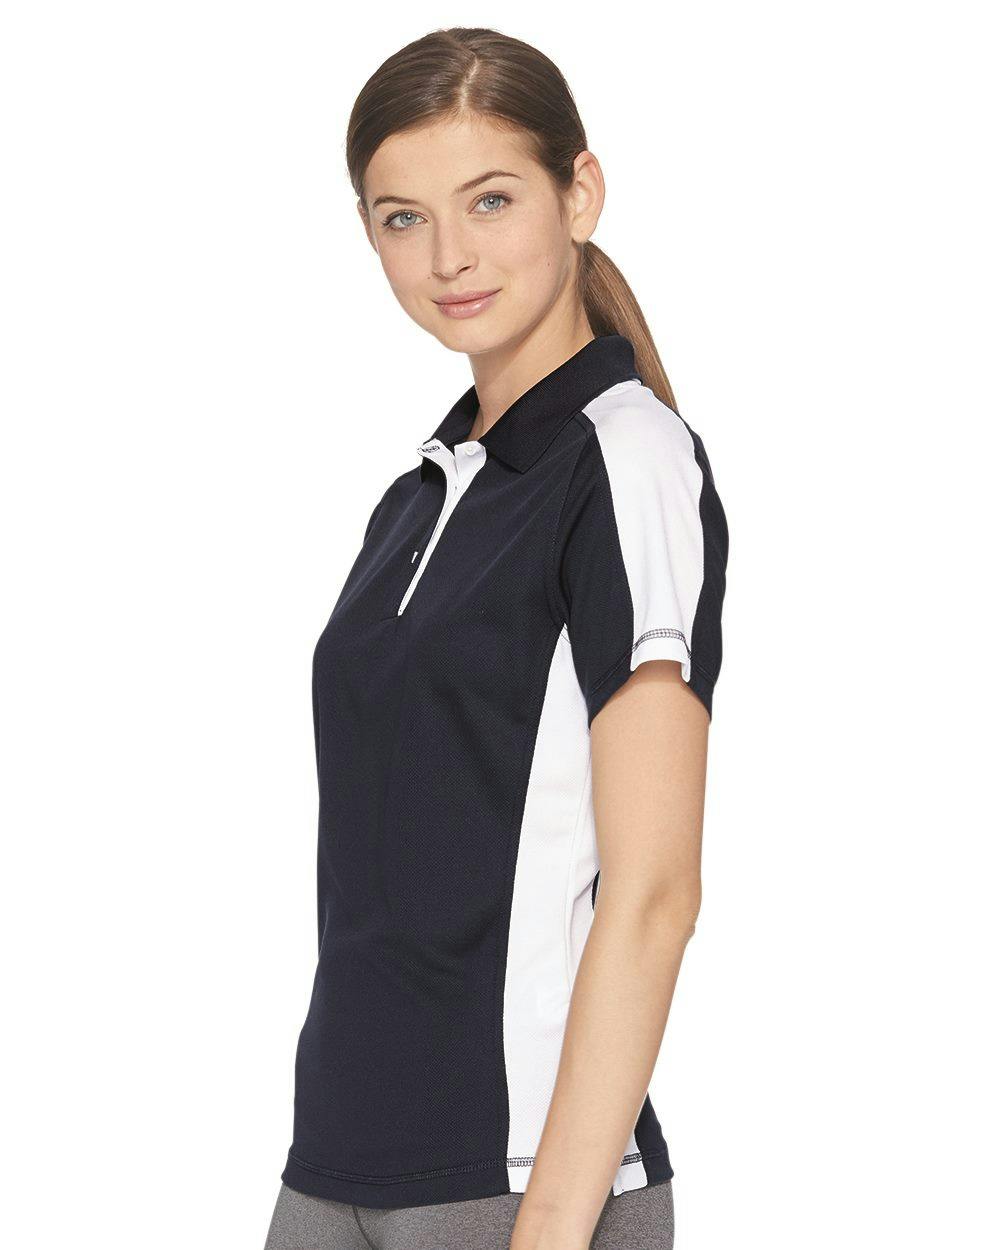 Image for Women's Colorblocked Moisture Free Mesh Polo - 5465